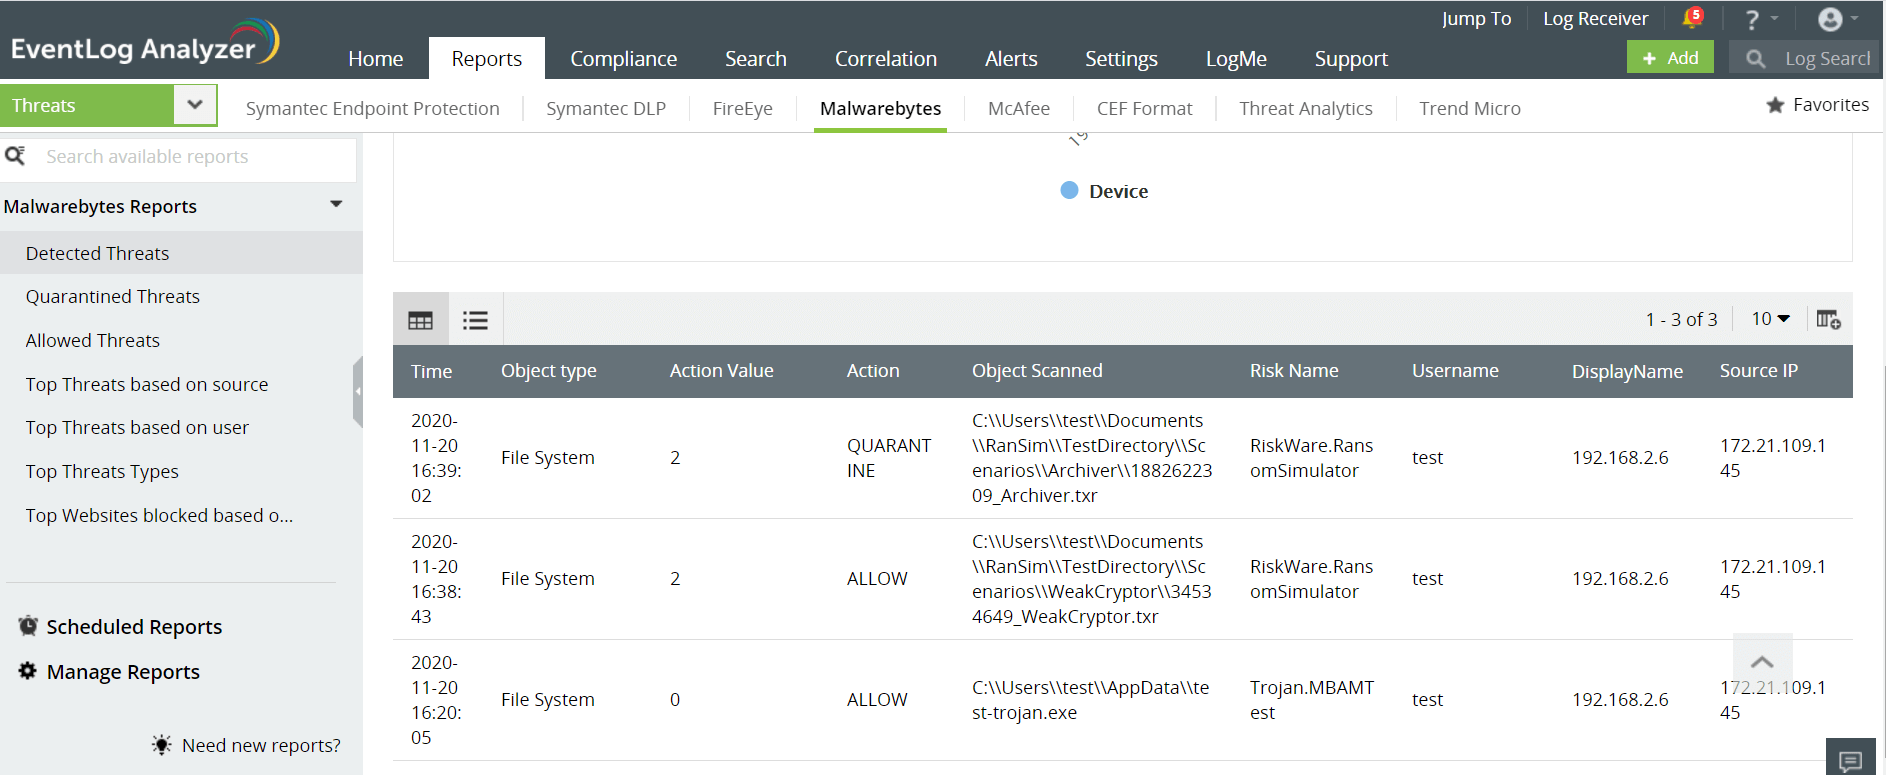 Reports for Malwarebytes devices